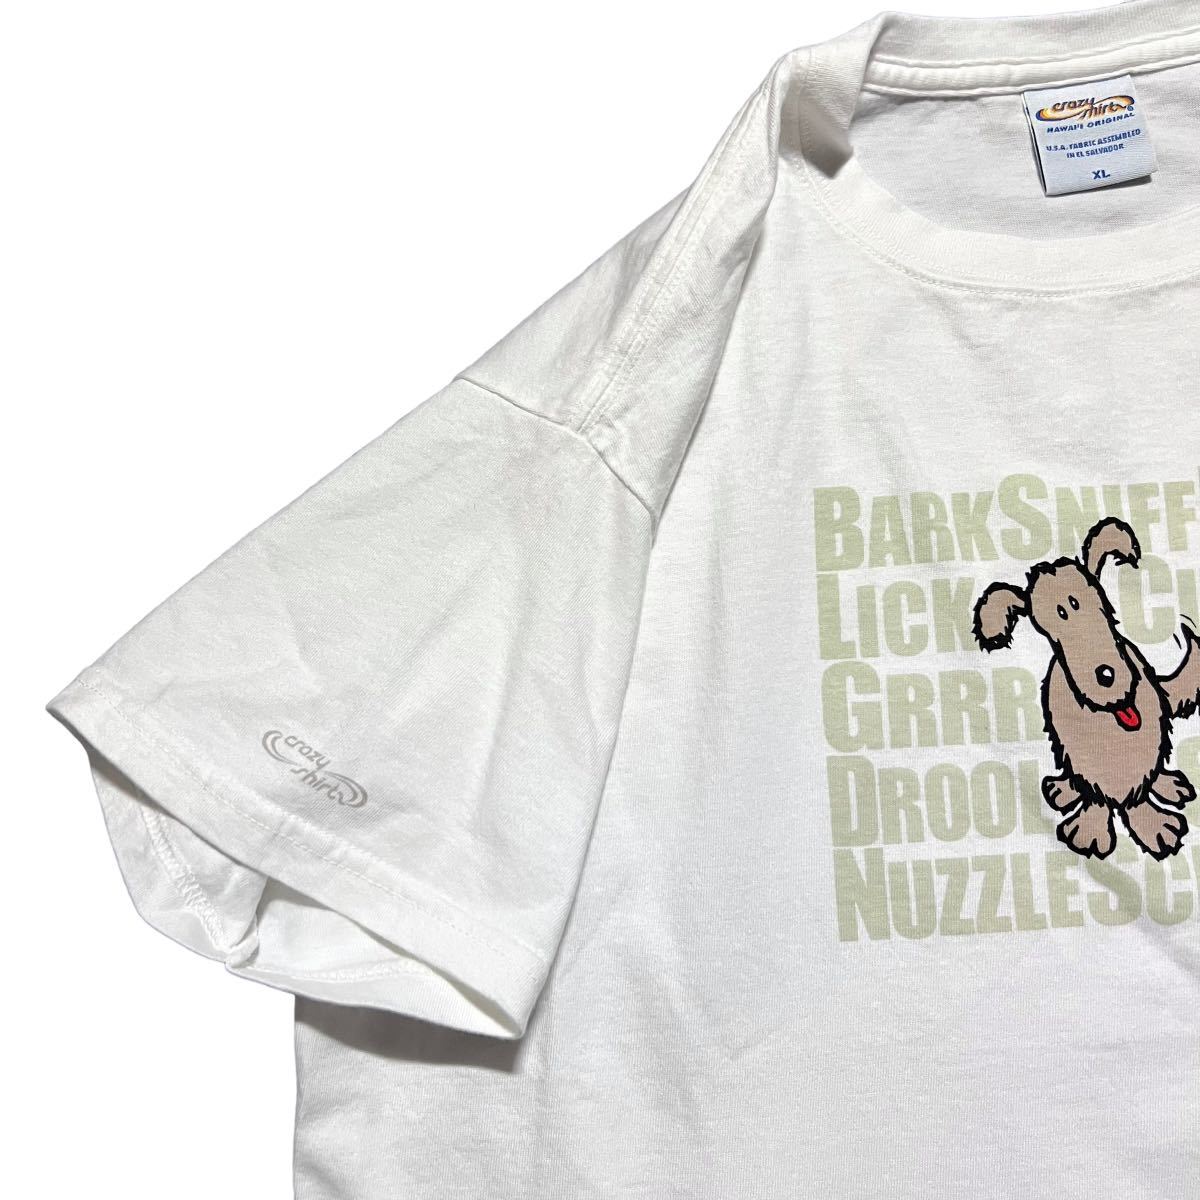 【90s crazy shirt ARF! 犬 プリント Tシャツ】ビンテージ ヴィンテージ 古着 90s 80s 70s 60s 50s 40s USA製 Y2K ストリート 着用 Tee